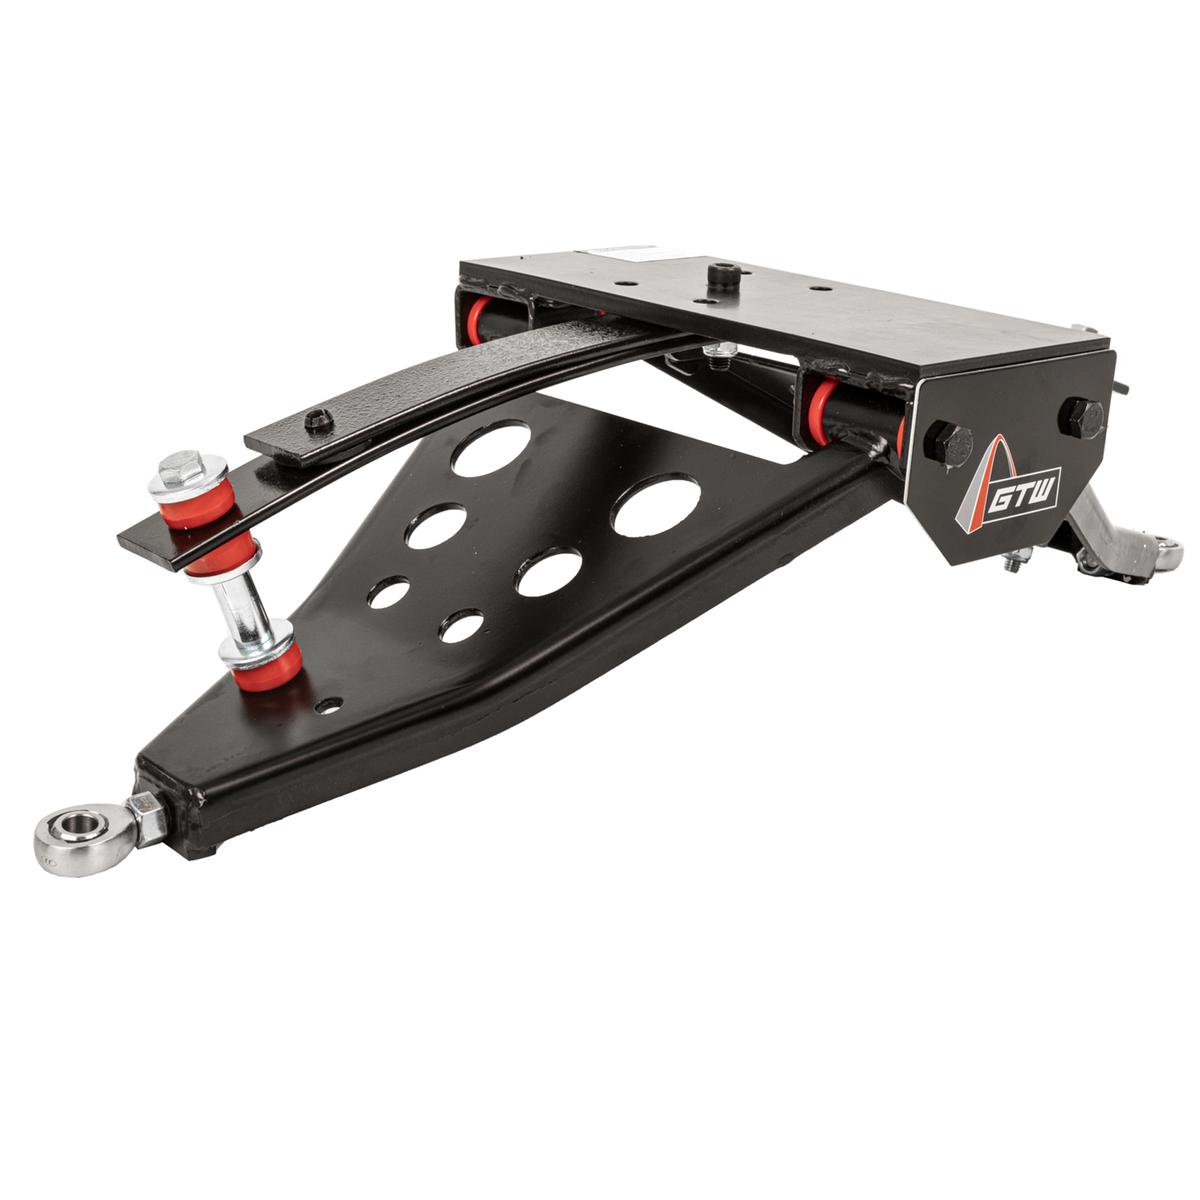 GTW 4 inch Double A-Arm Lift Kit for Club Car Precedent/Tempo